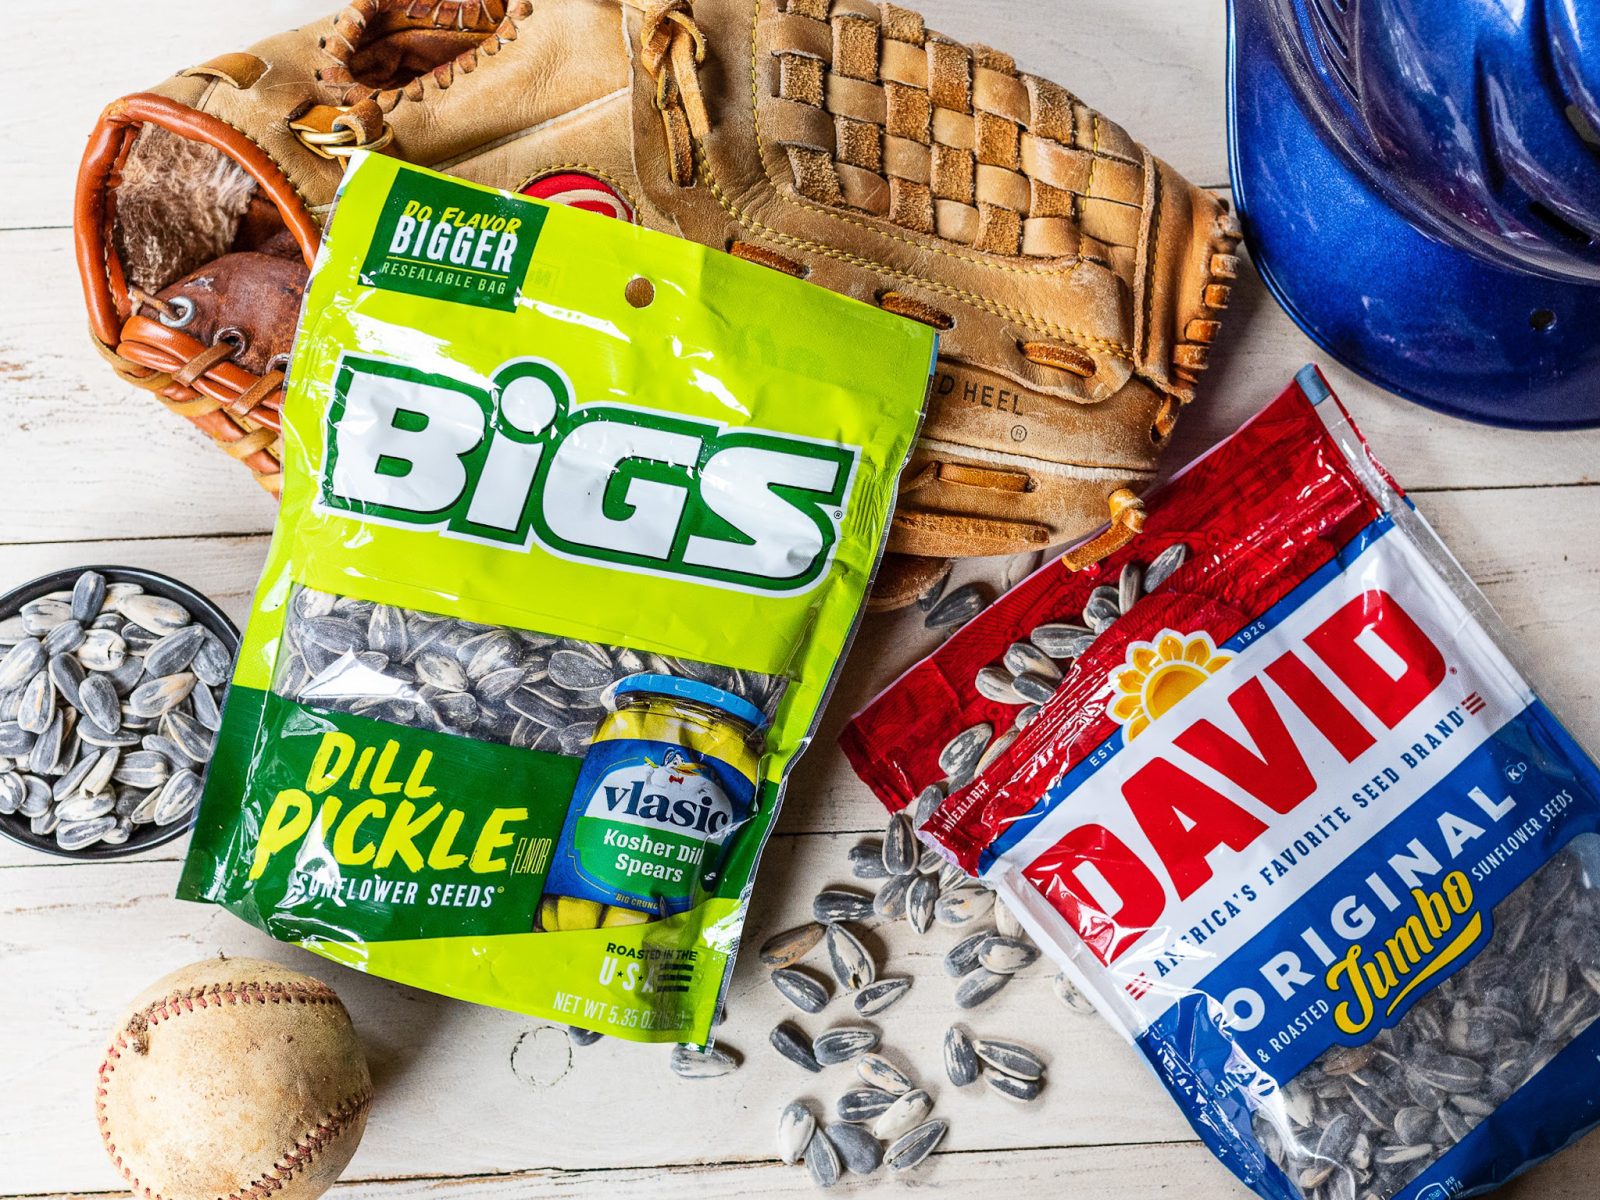 David And Bigs Sunflower Seeds Just $1.50 At Publix